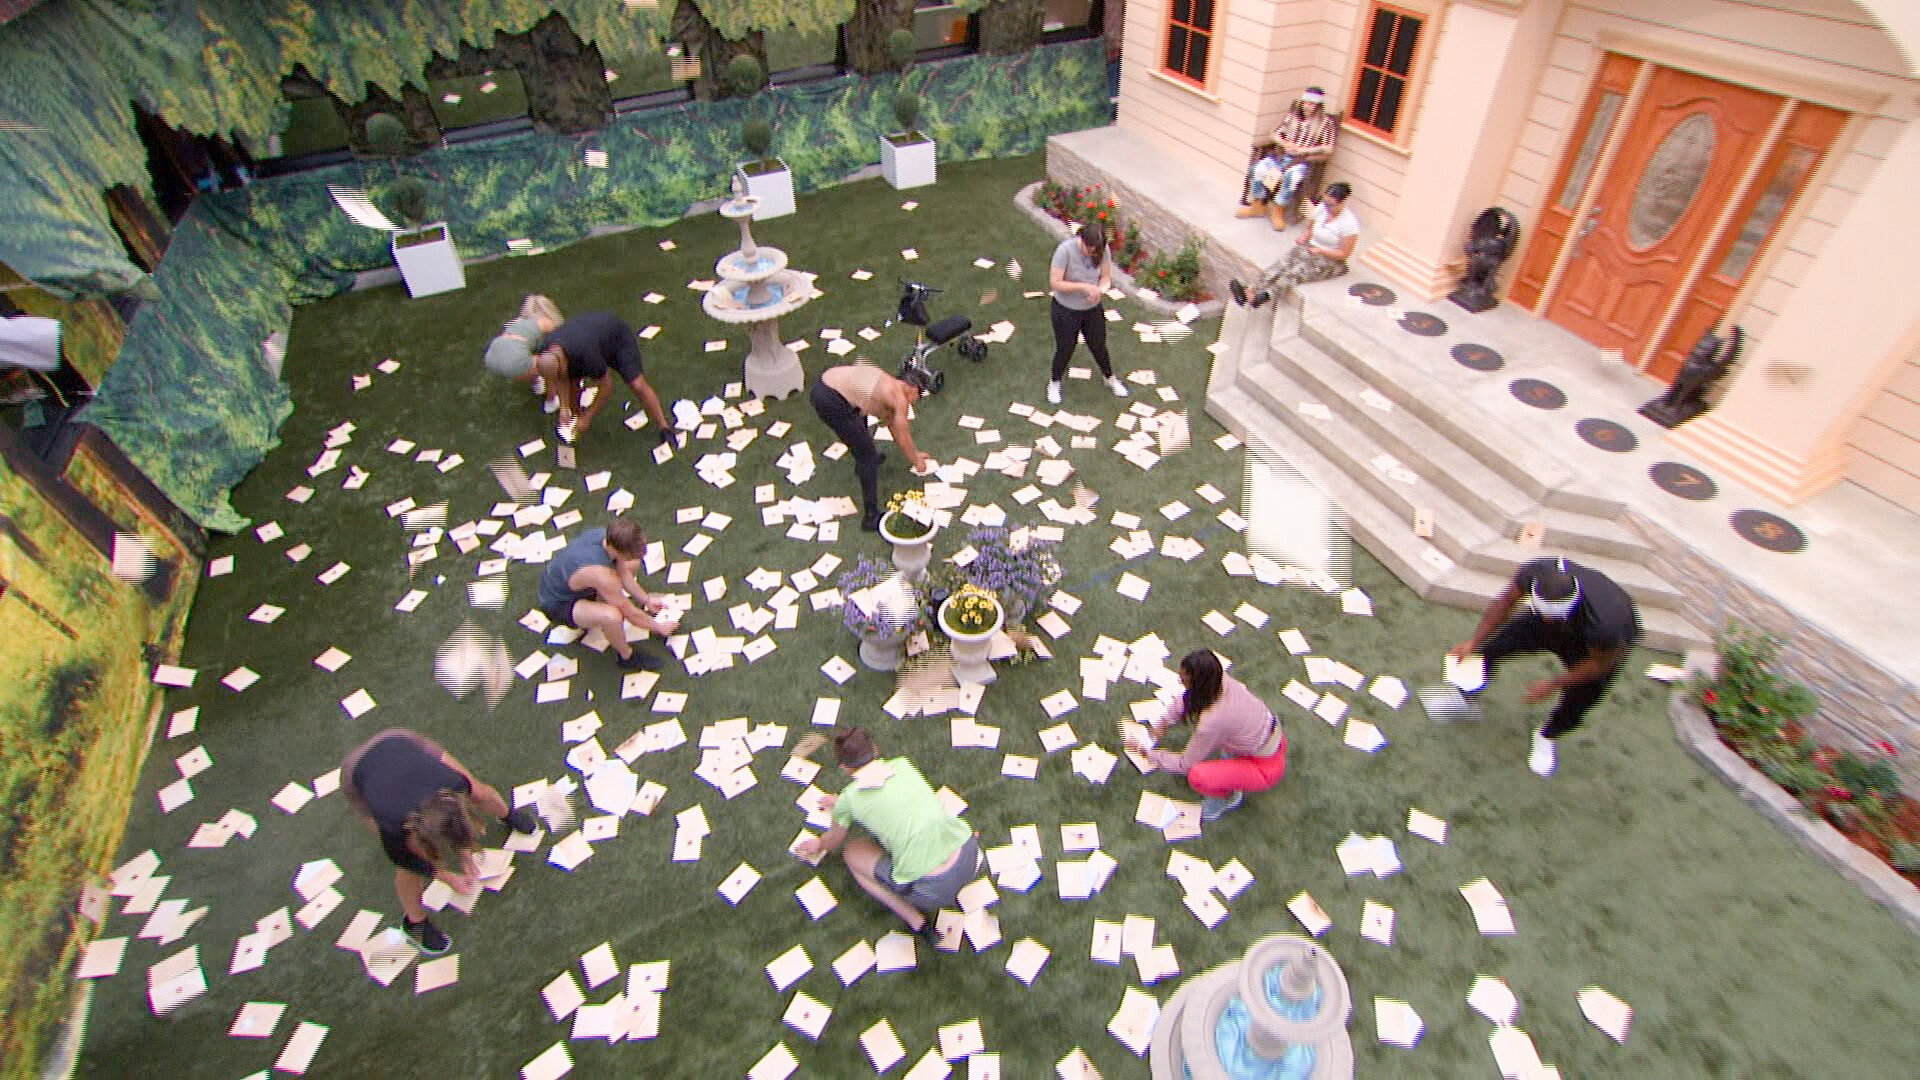 'Big Brother 24' cast grabbing envelopes on the ground during competition